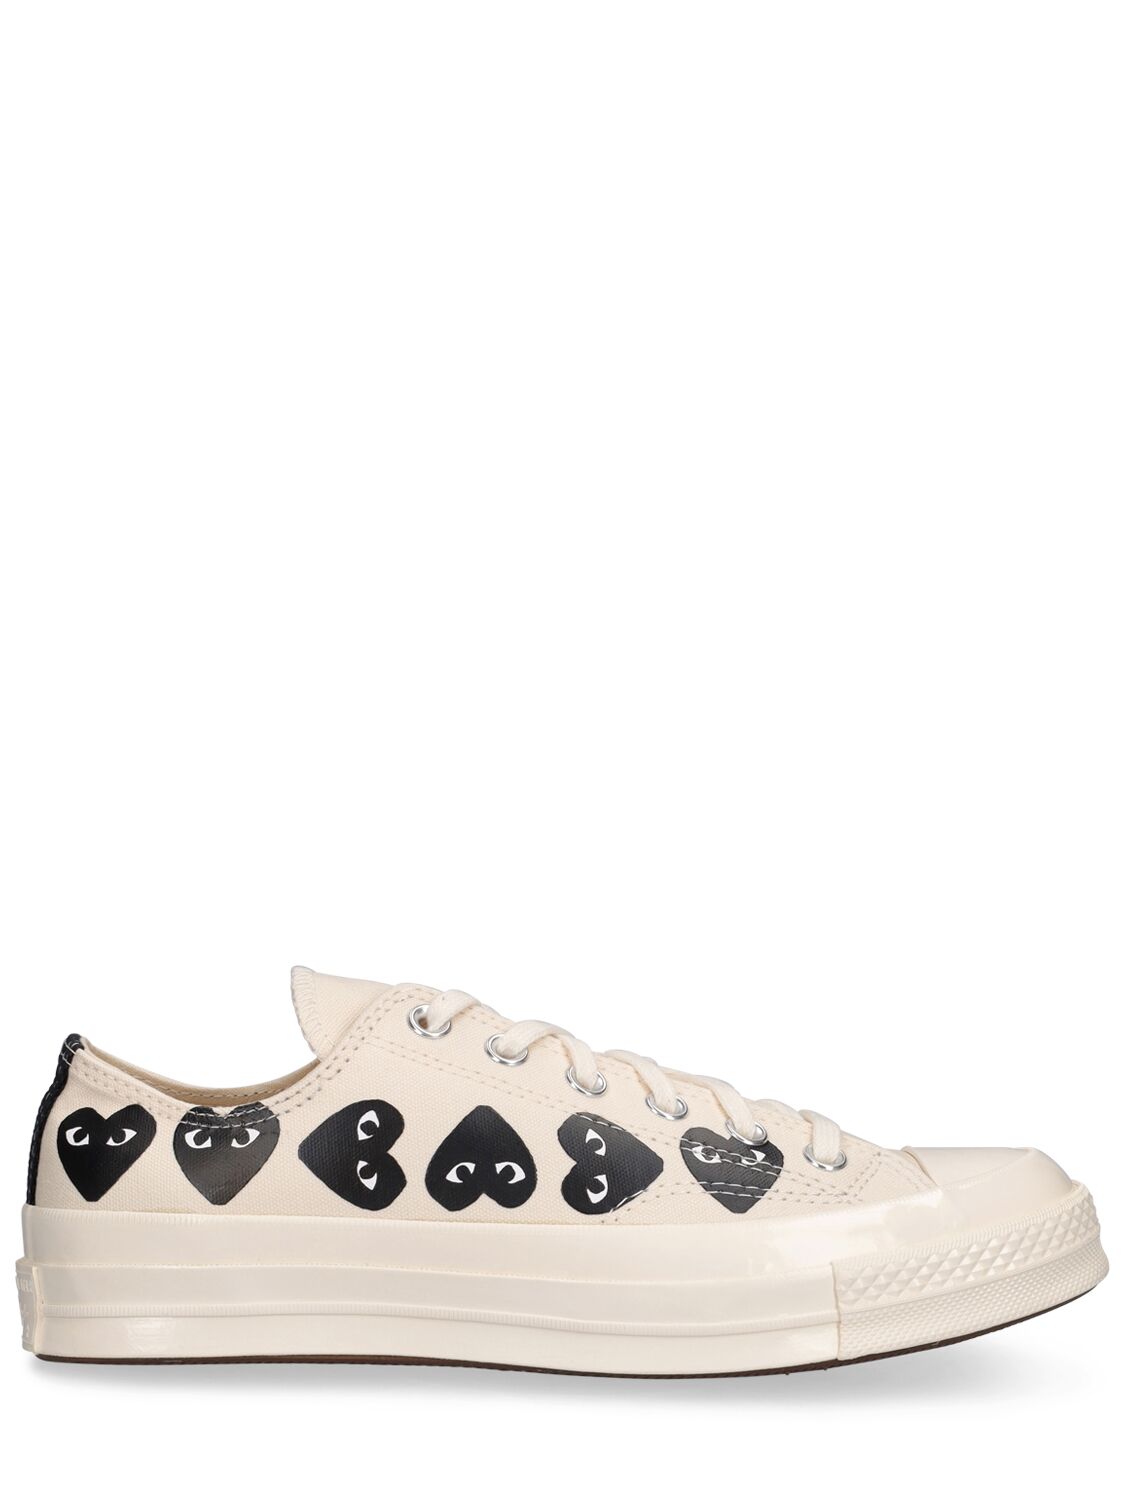 Comme Des Garçons Play 20mm Play Converse Cotton Sneakers In White